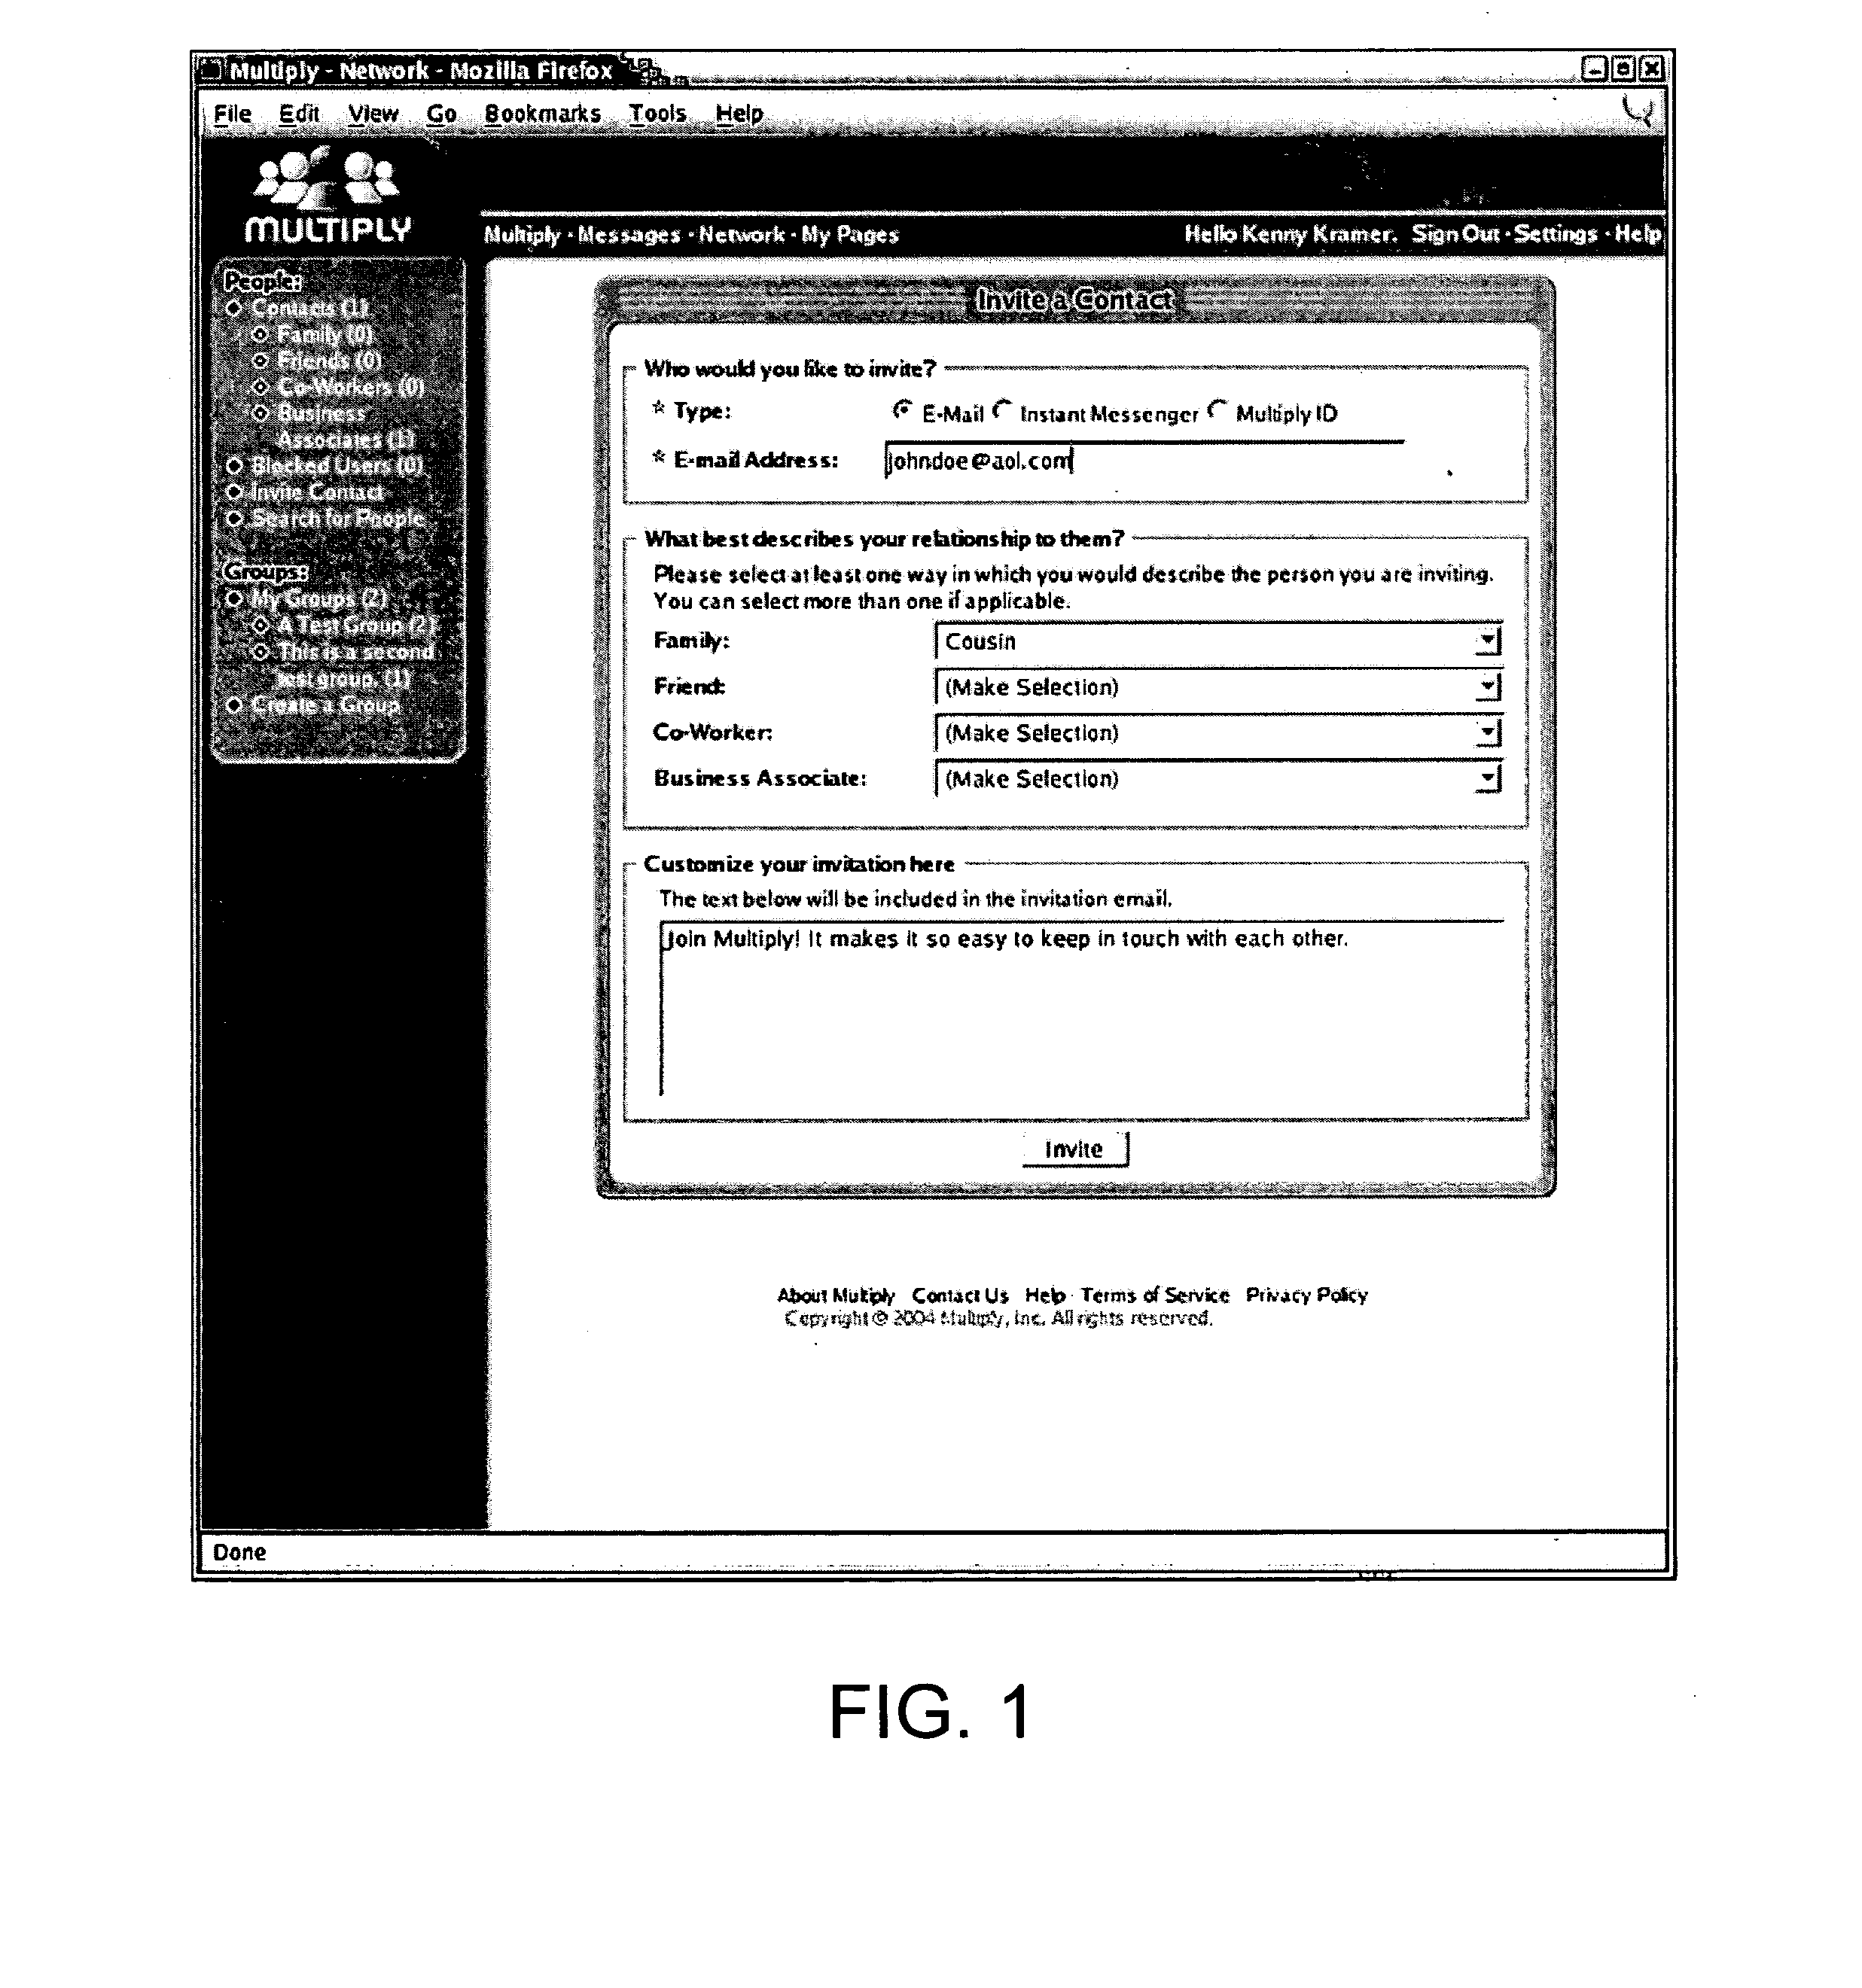 Method and system for controlling access to user information in a social networking environment